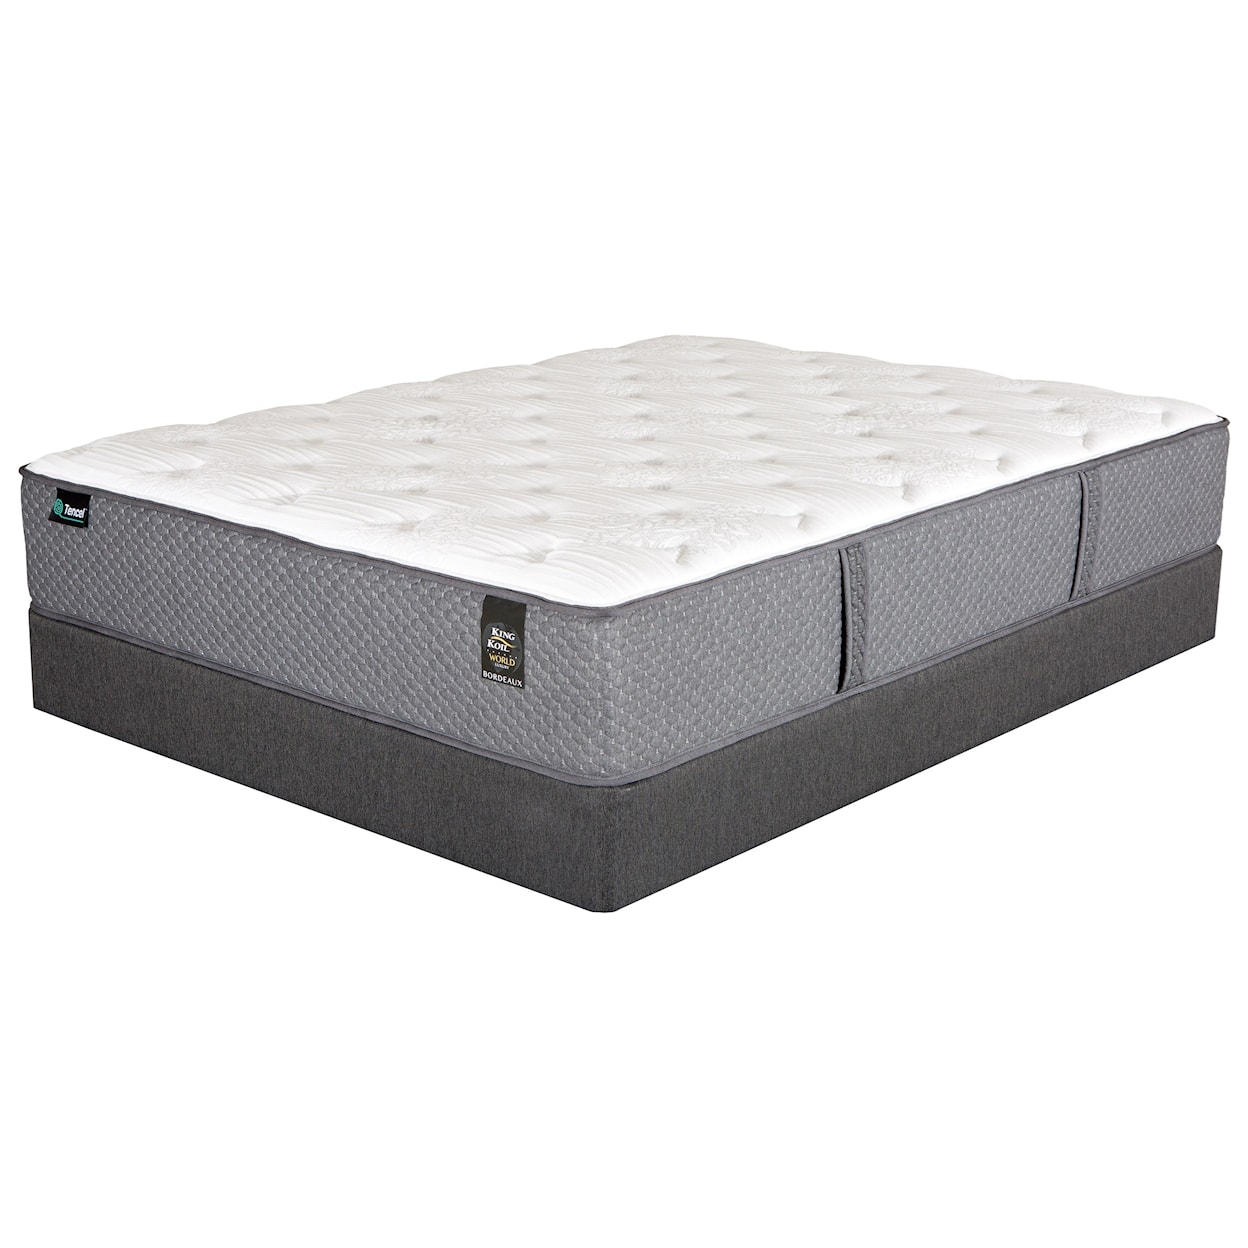 King Koil Beaumont P Full Pocketed Coil Mattress Set